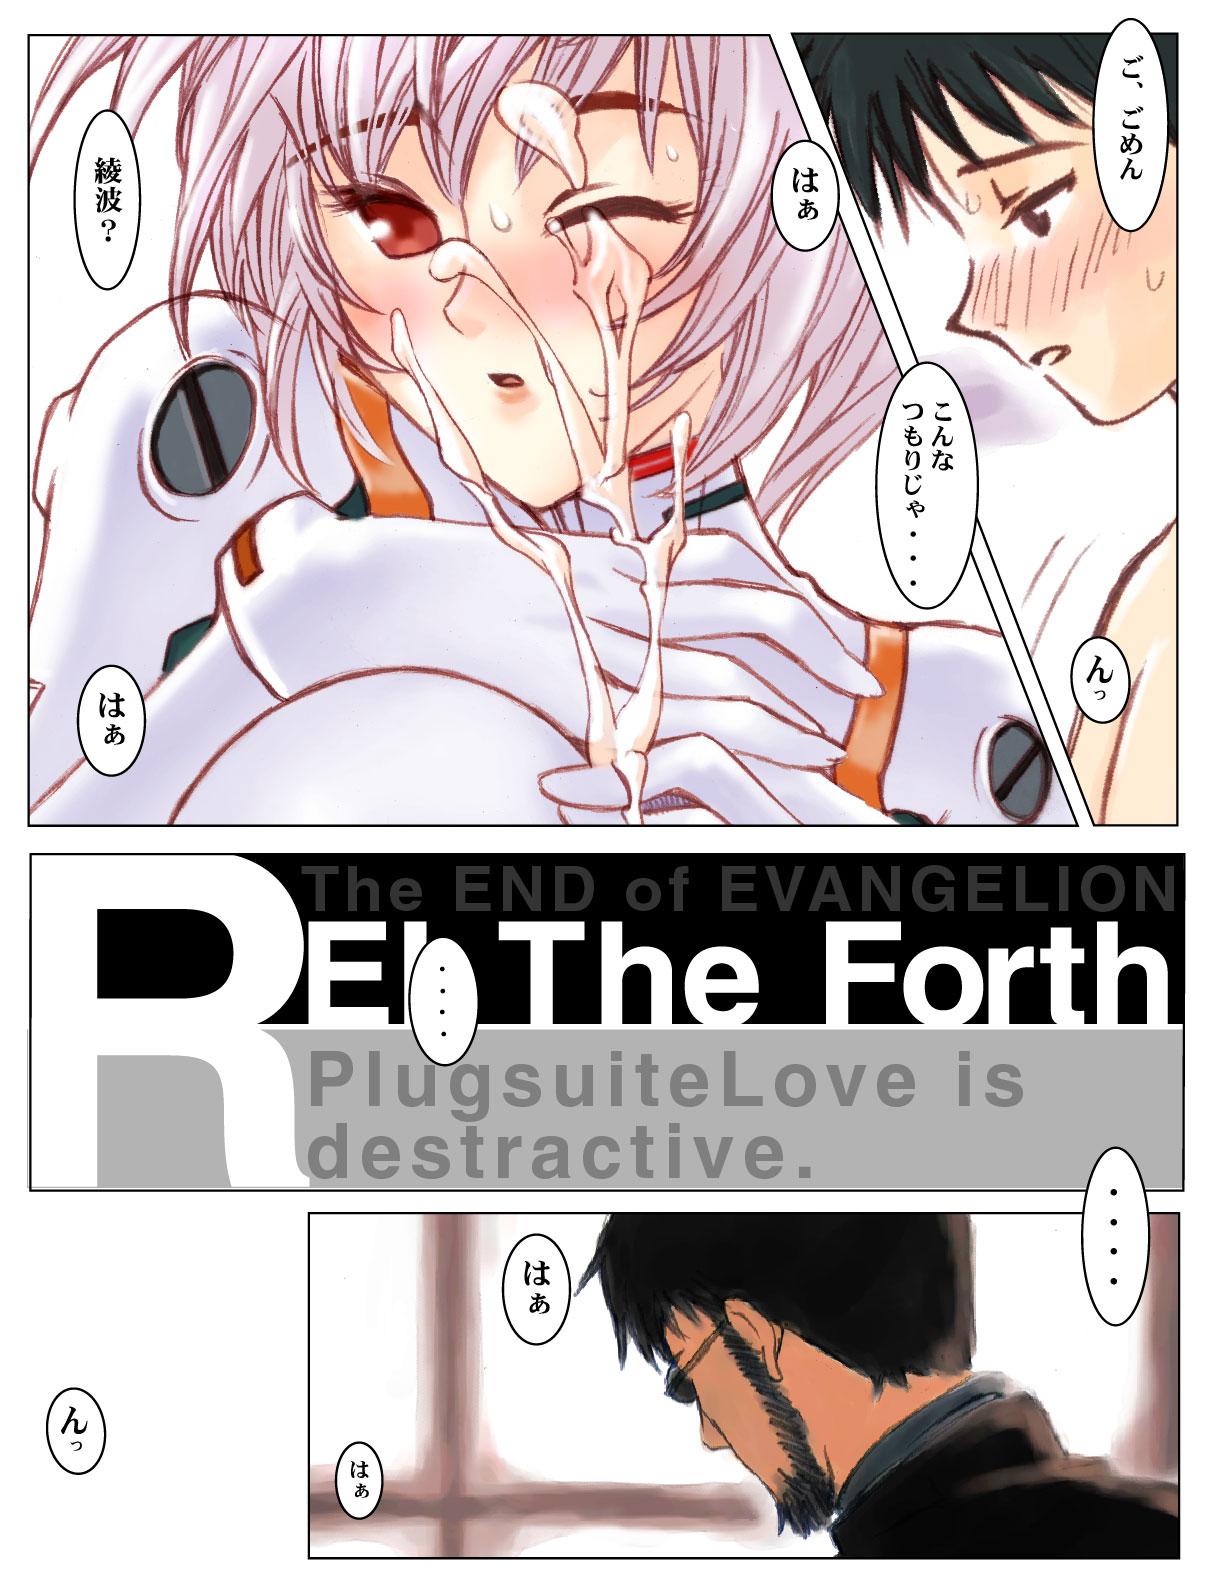 Rei the Forth 11